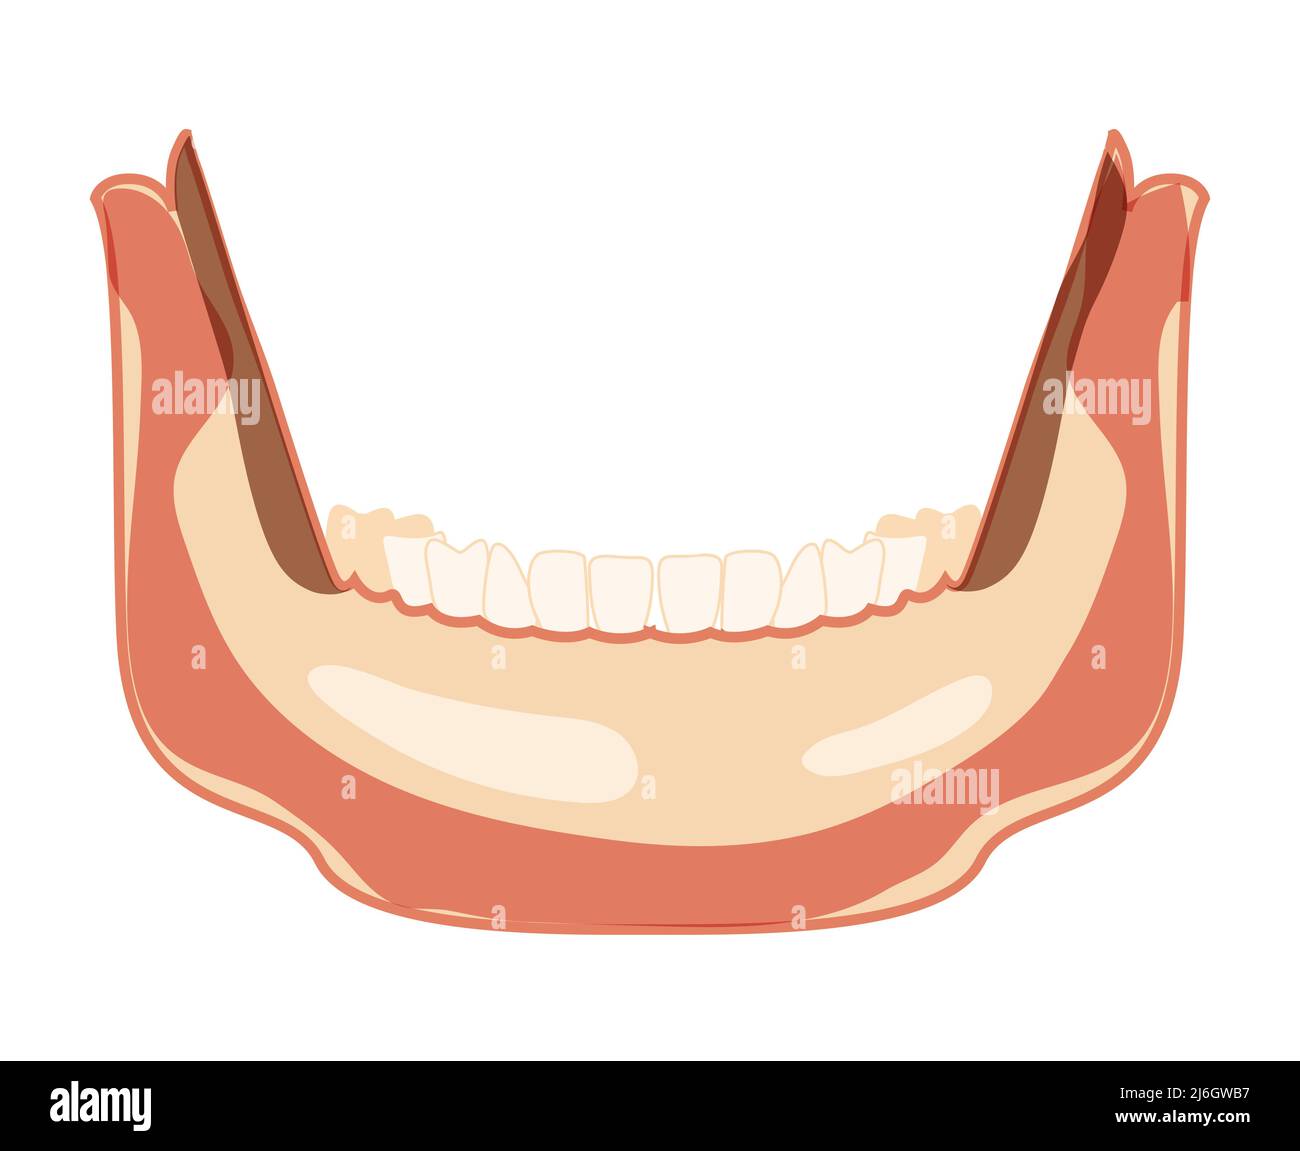 Mandible of Skeleton Human head front view with lower teeth row. Skull lower jaw head model. Chump realistic flat natural color concept Vector illustration of anatomy isolated on white background Stock Vector